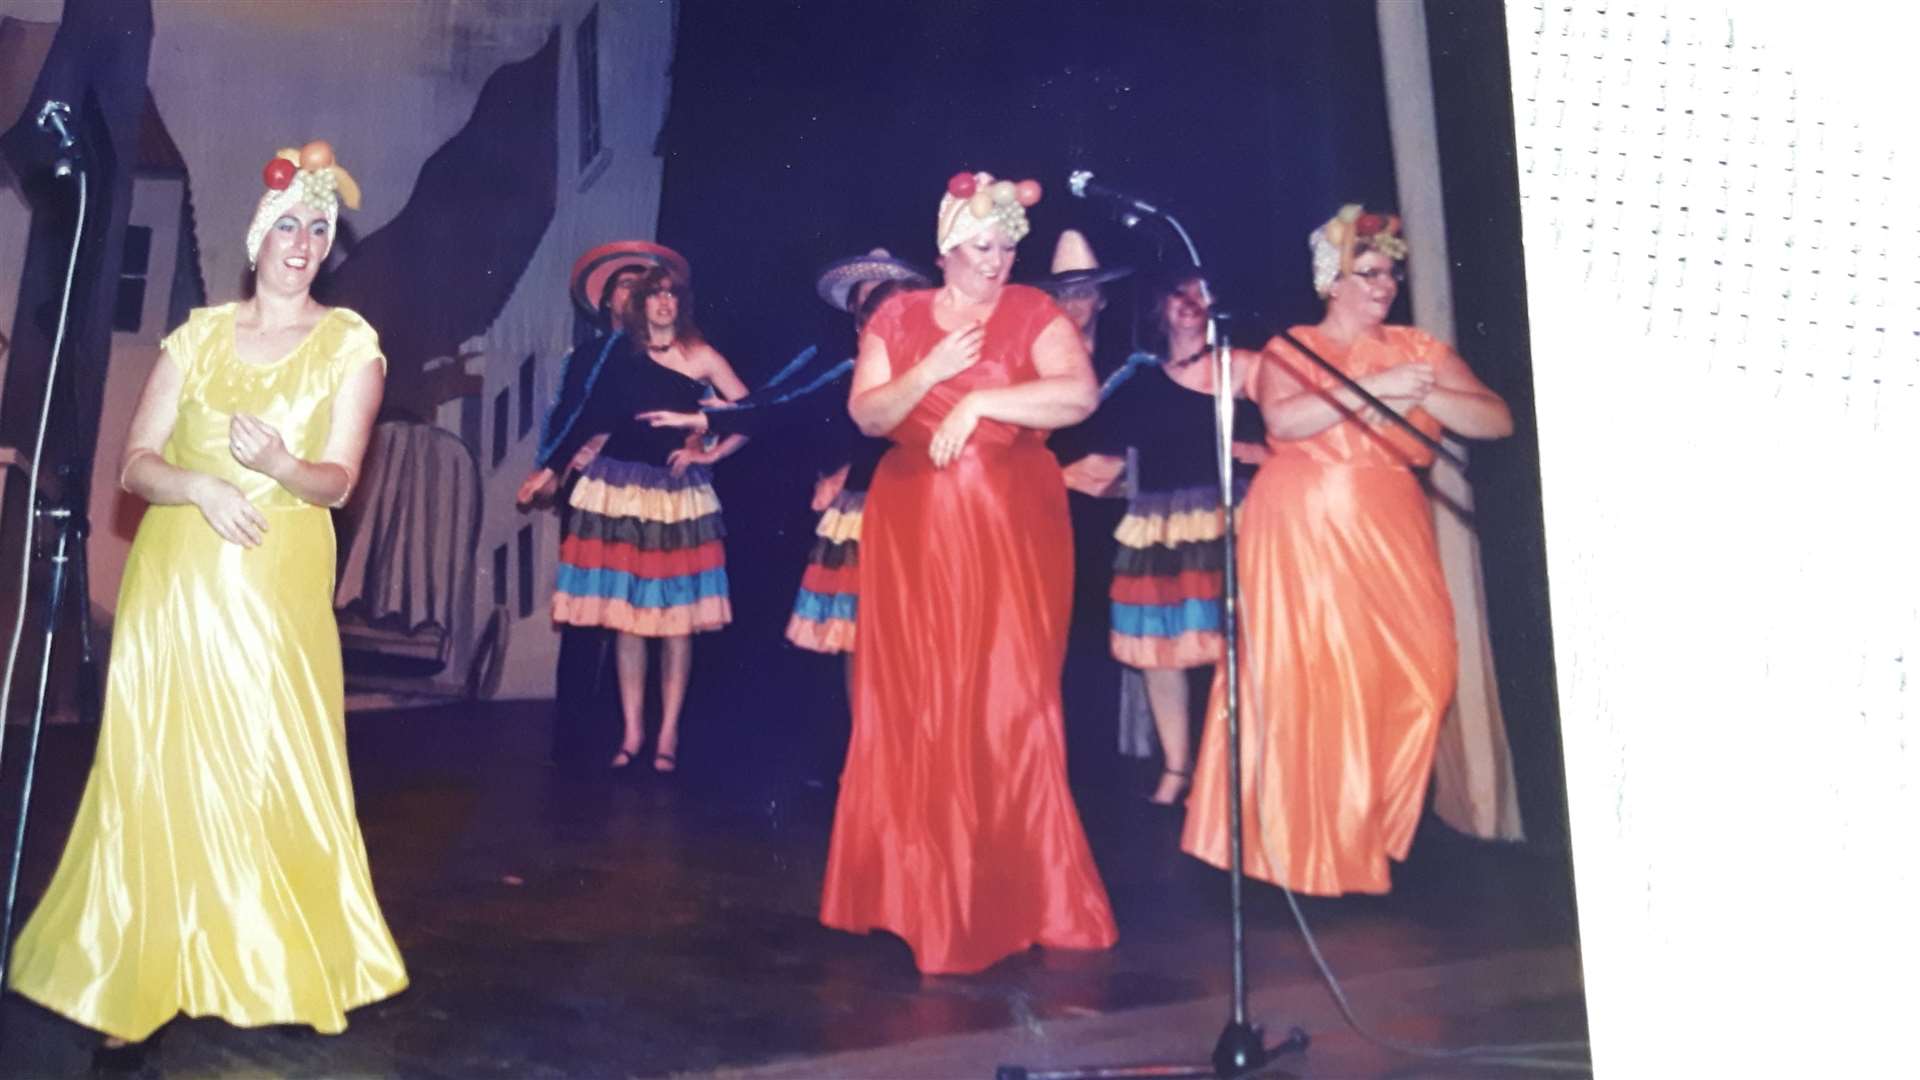 A scene from Brazil with Angela Waller in the red dress and Chrissie Sandell in the orange in 1987